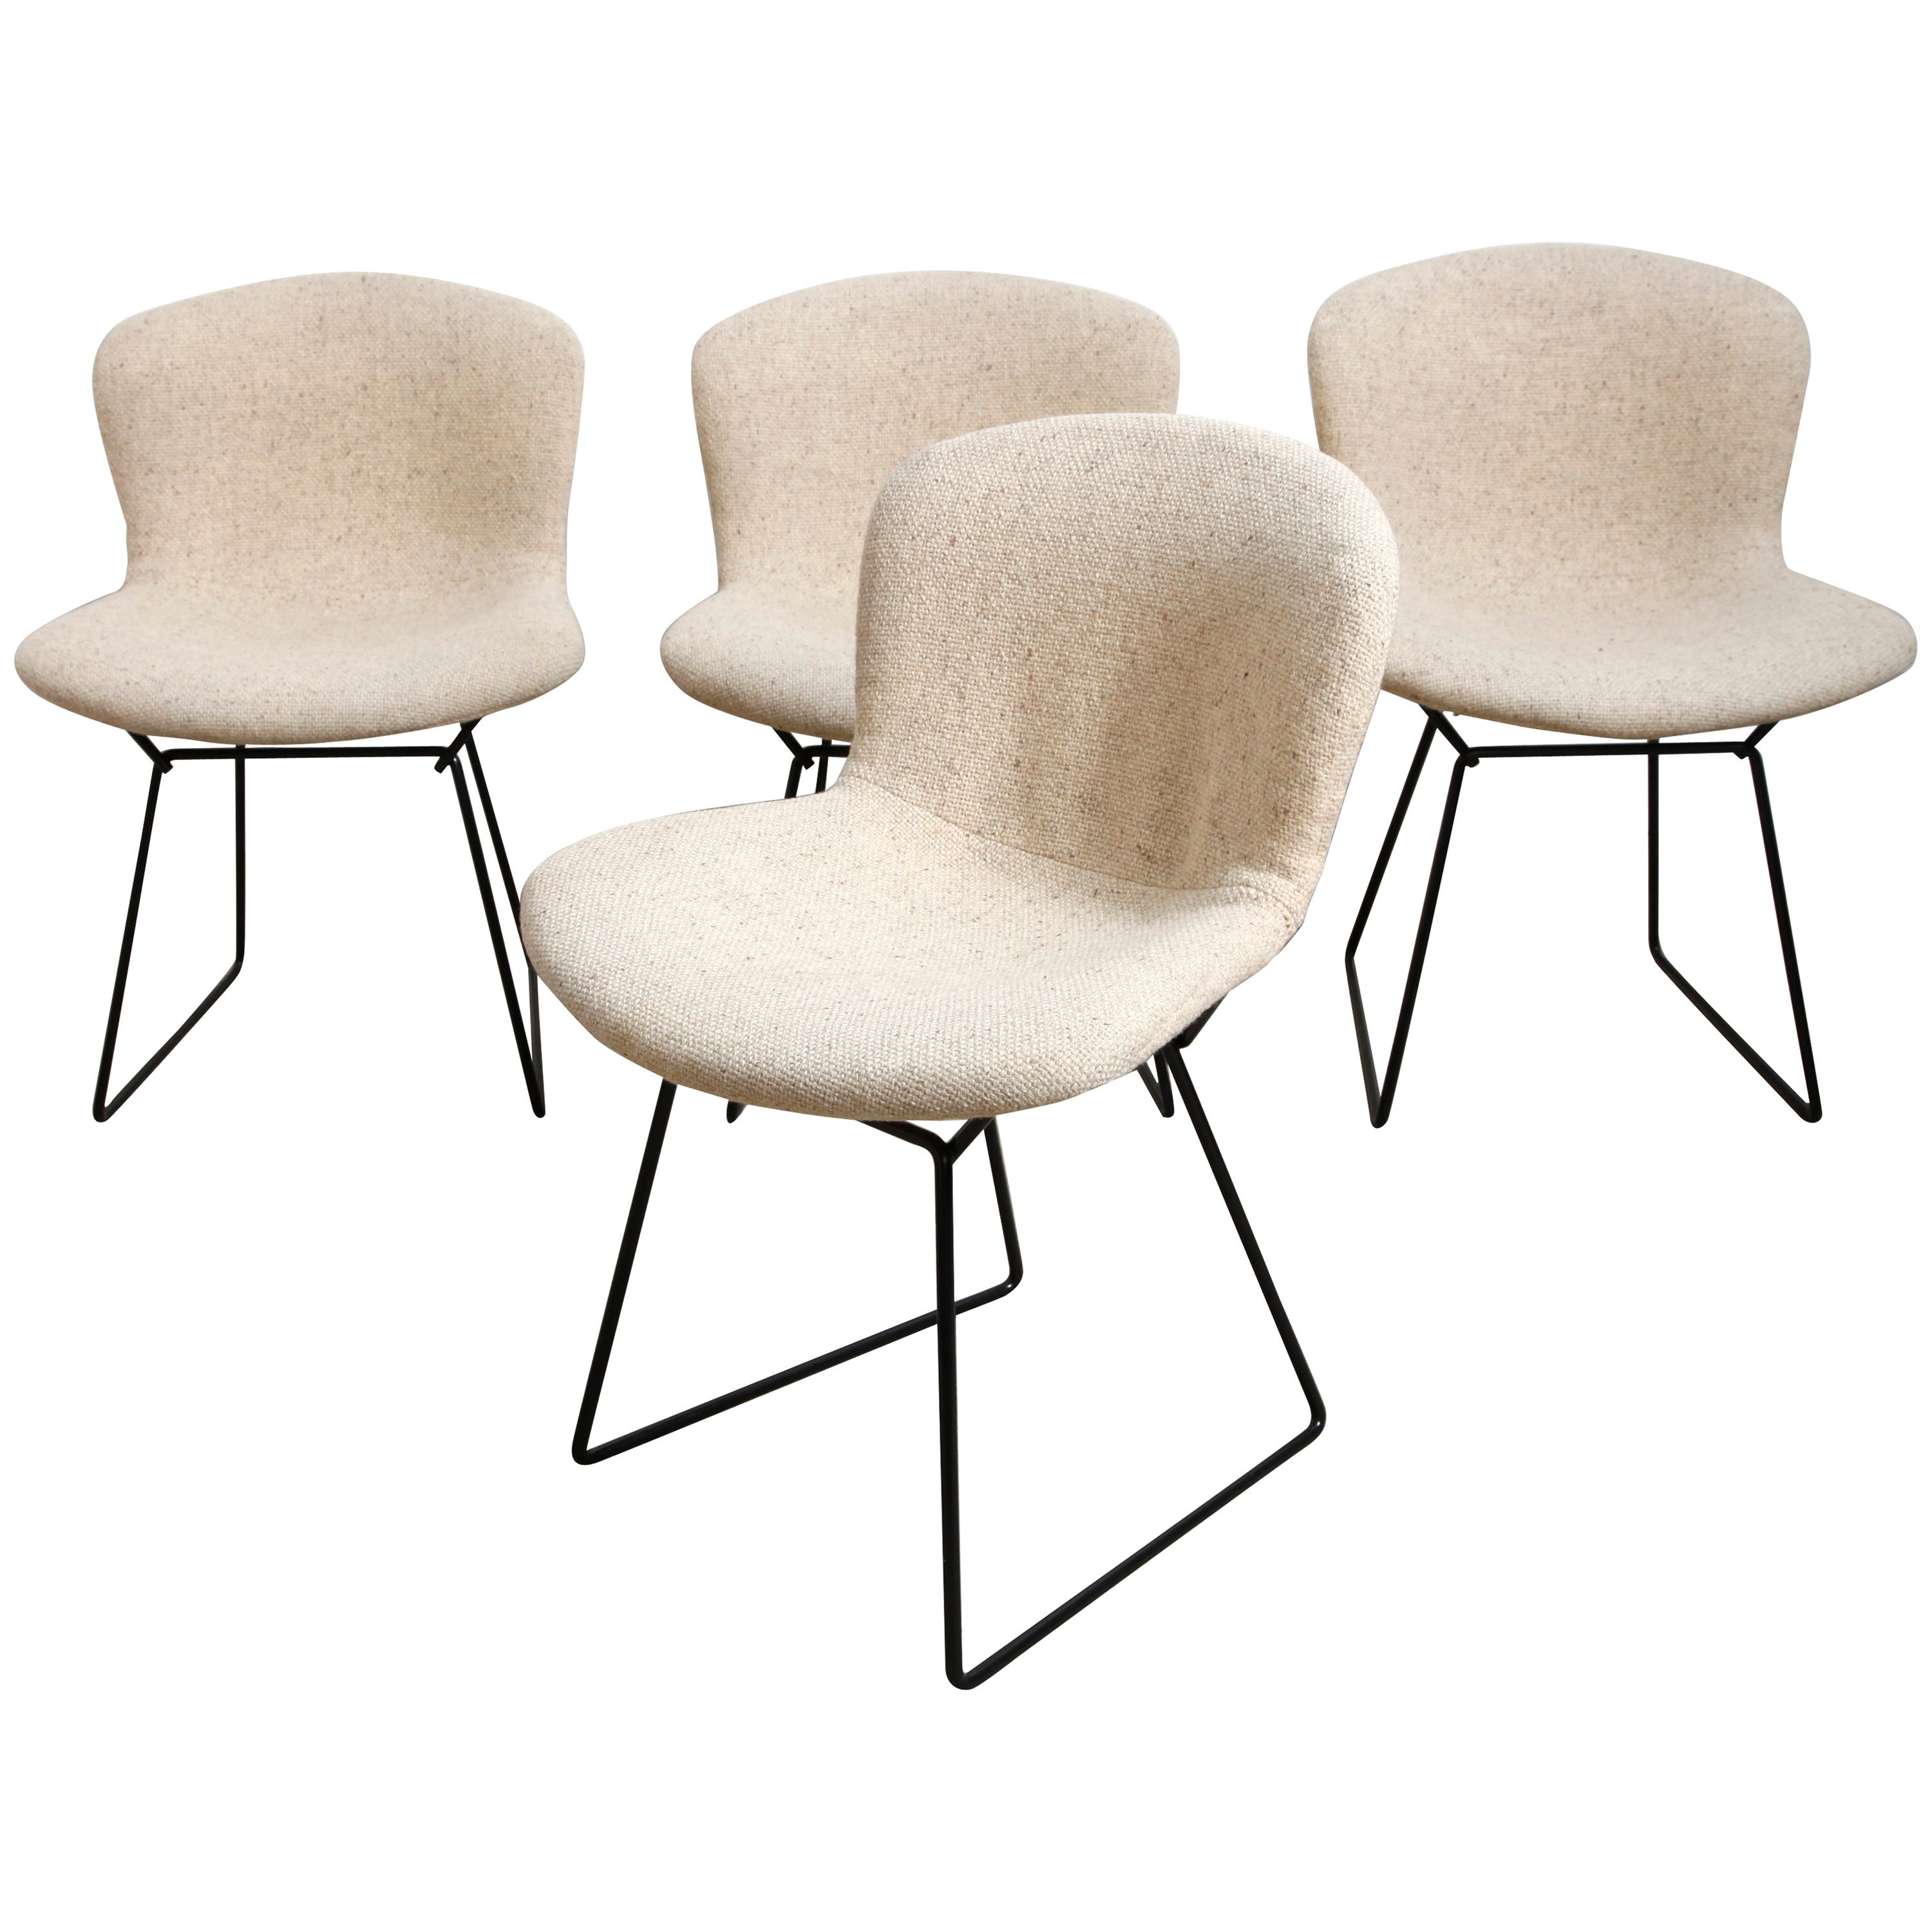 Set of Four Black Wire Chairs by Harry Bertoia for Knoll